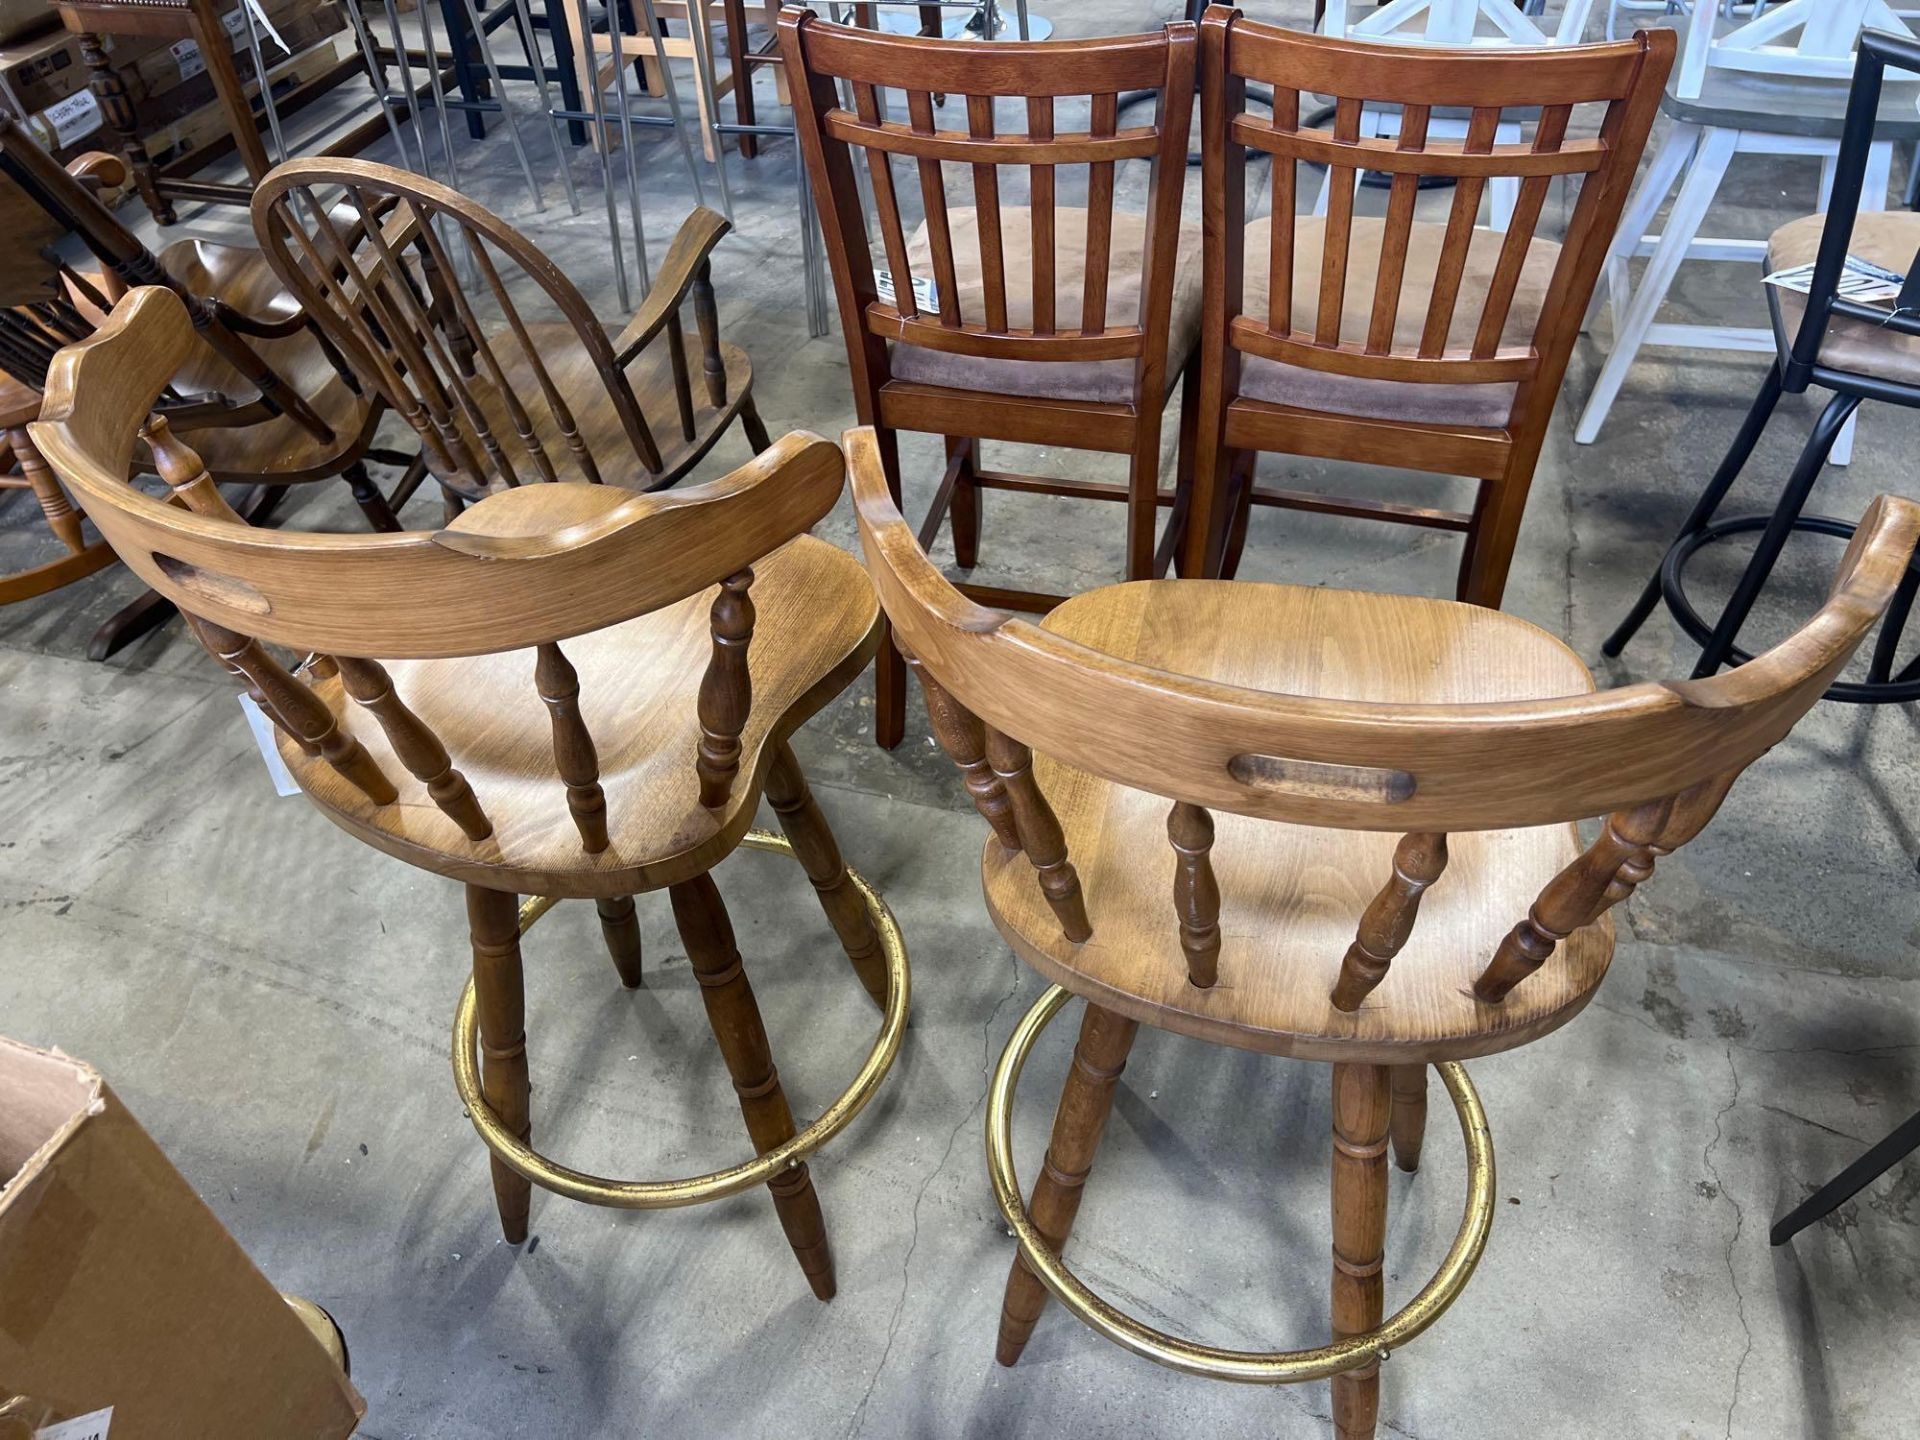 2 Wooden Stools - Image 2 of 3